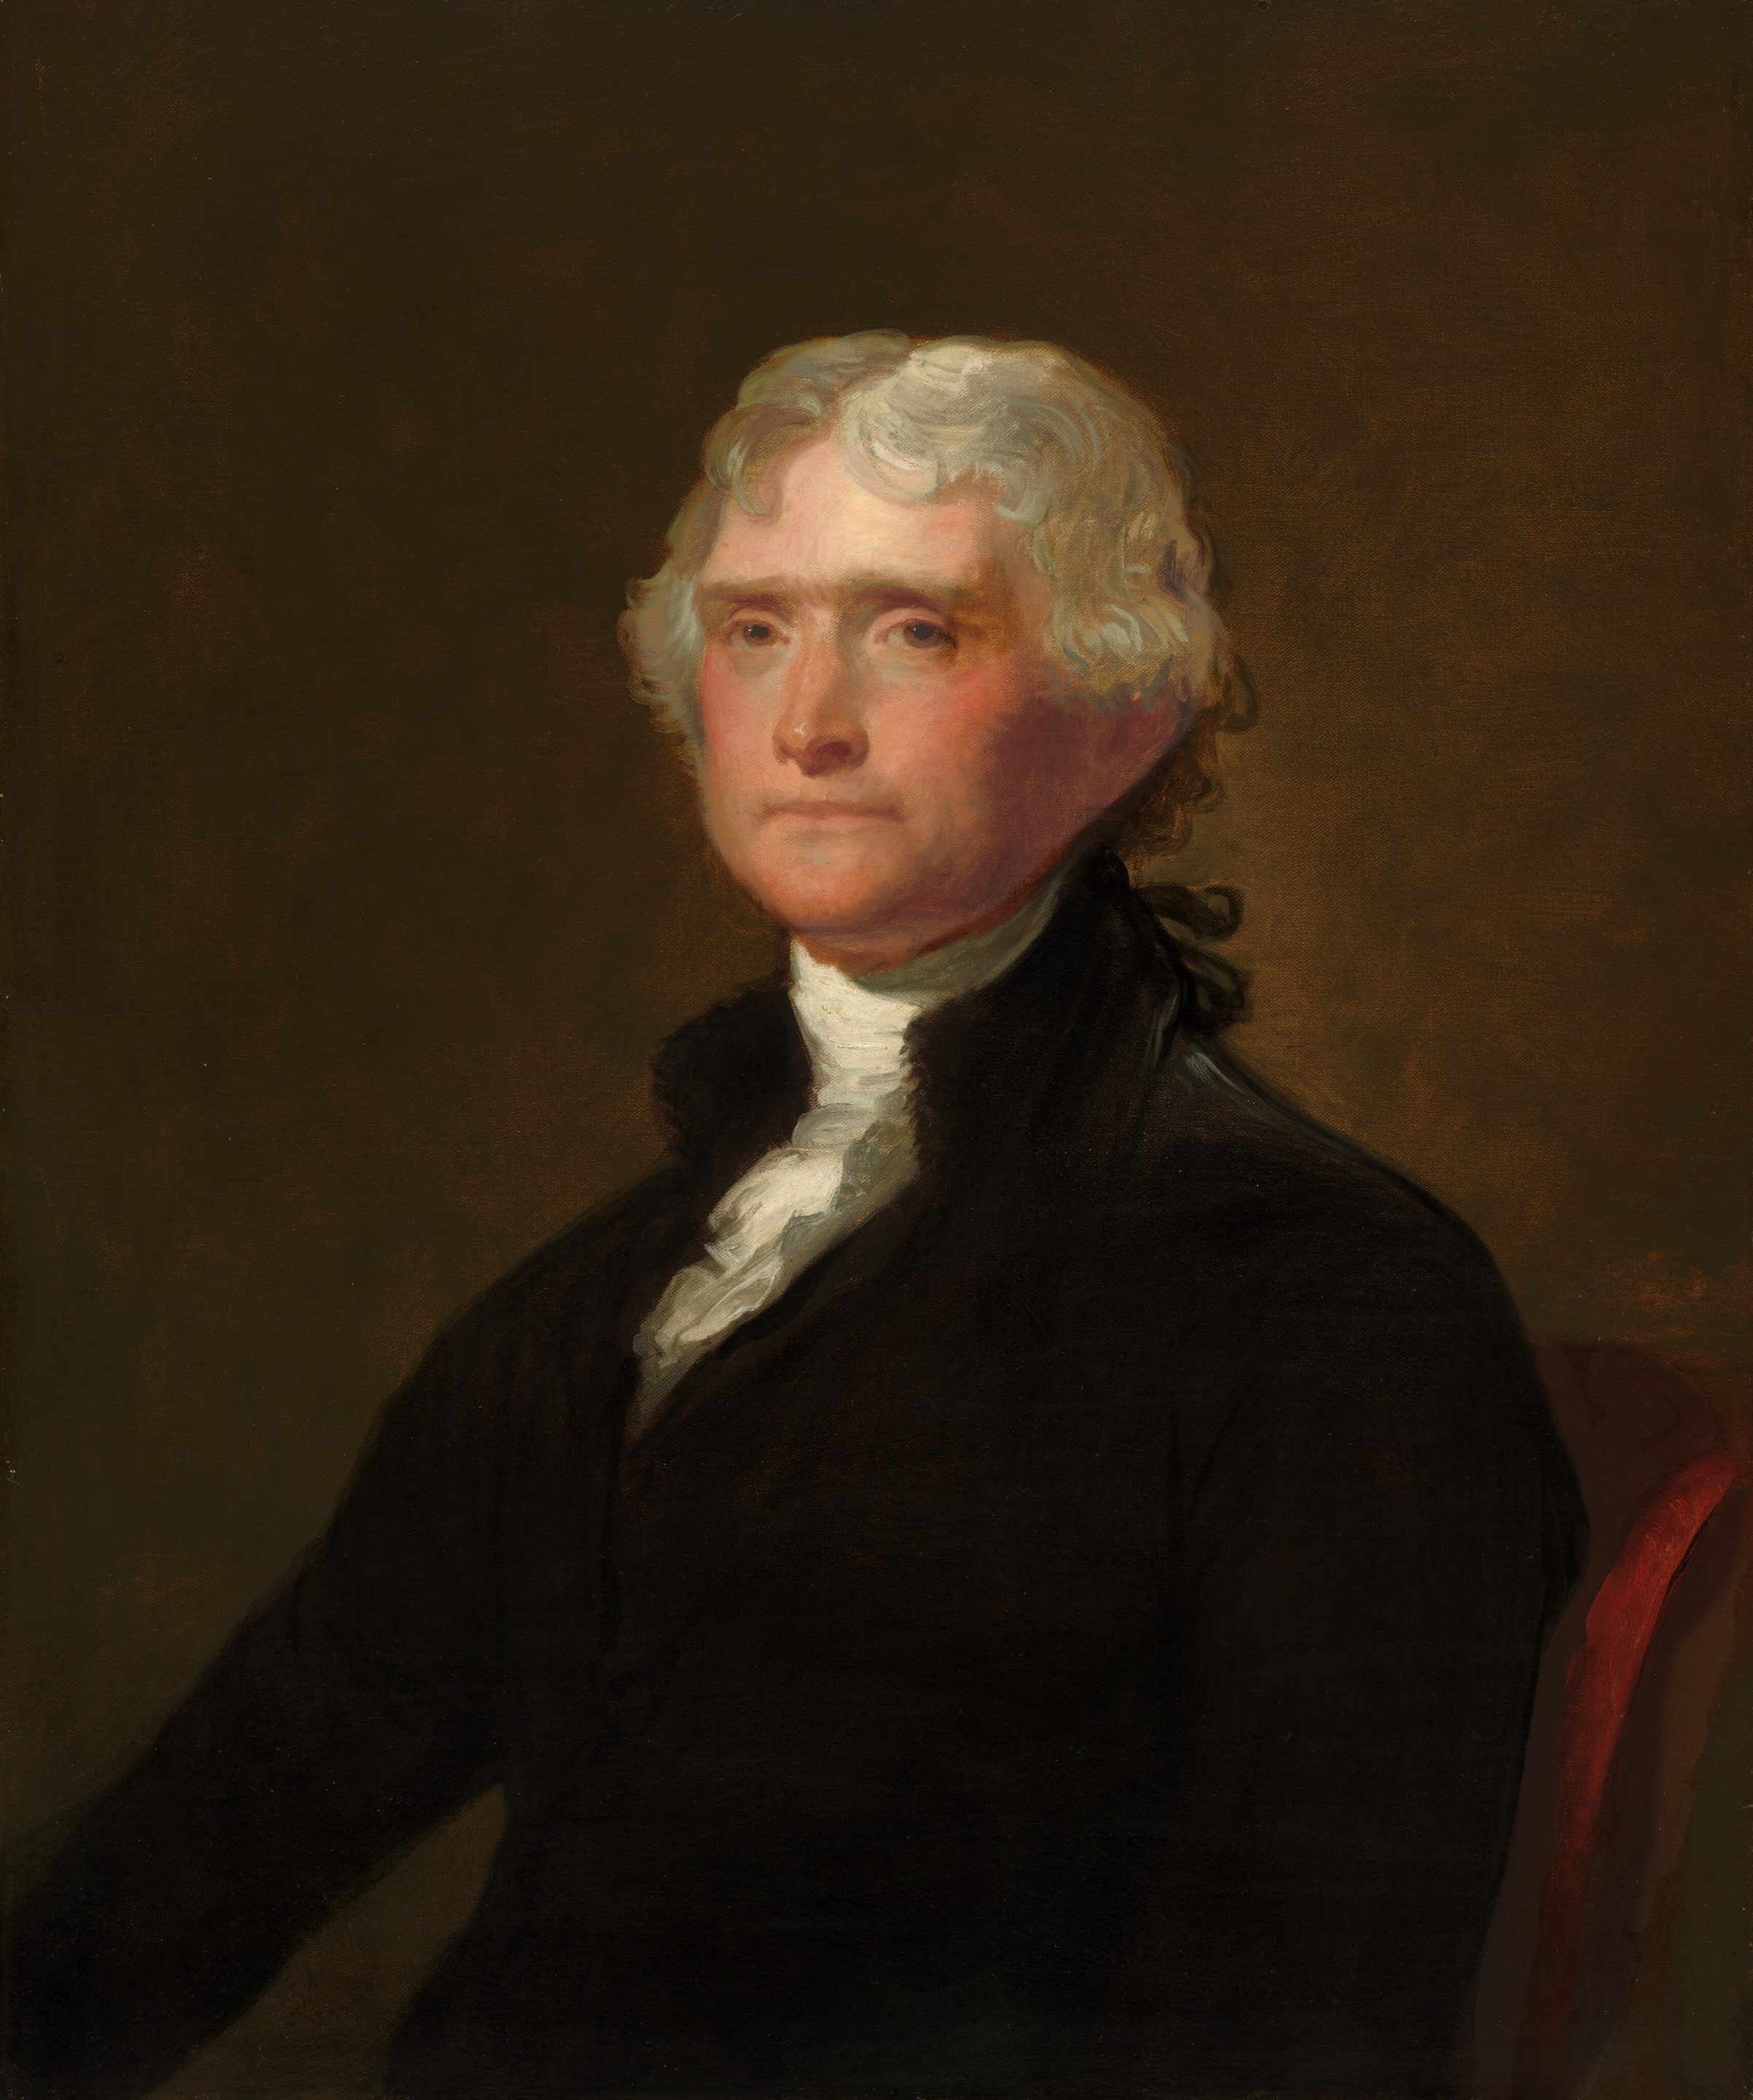 TGIF: Jefferson on Not Trusting the State